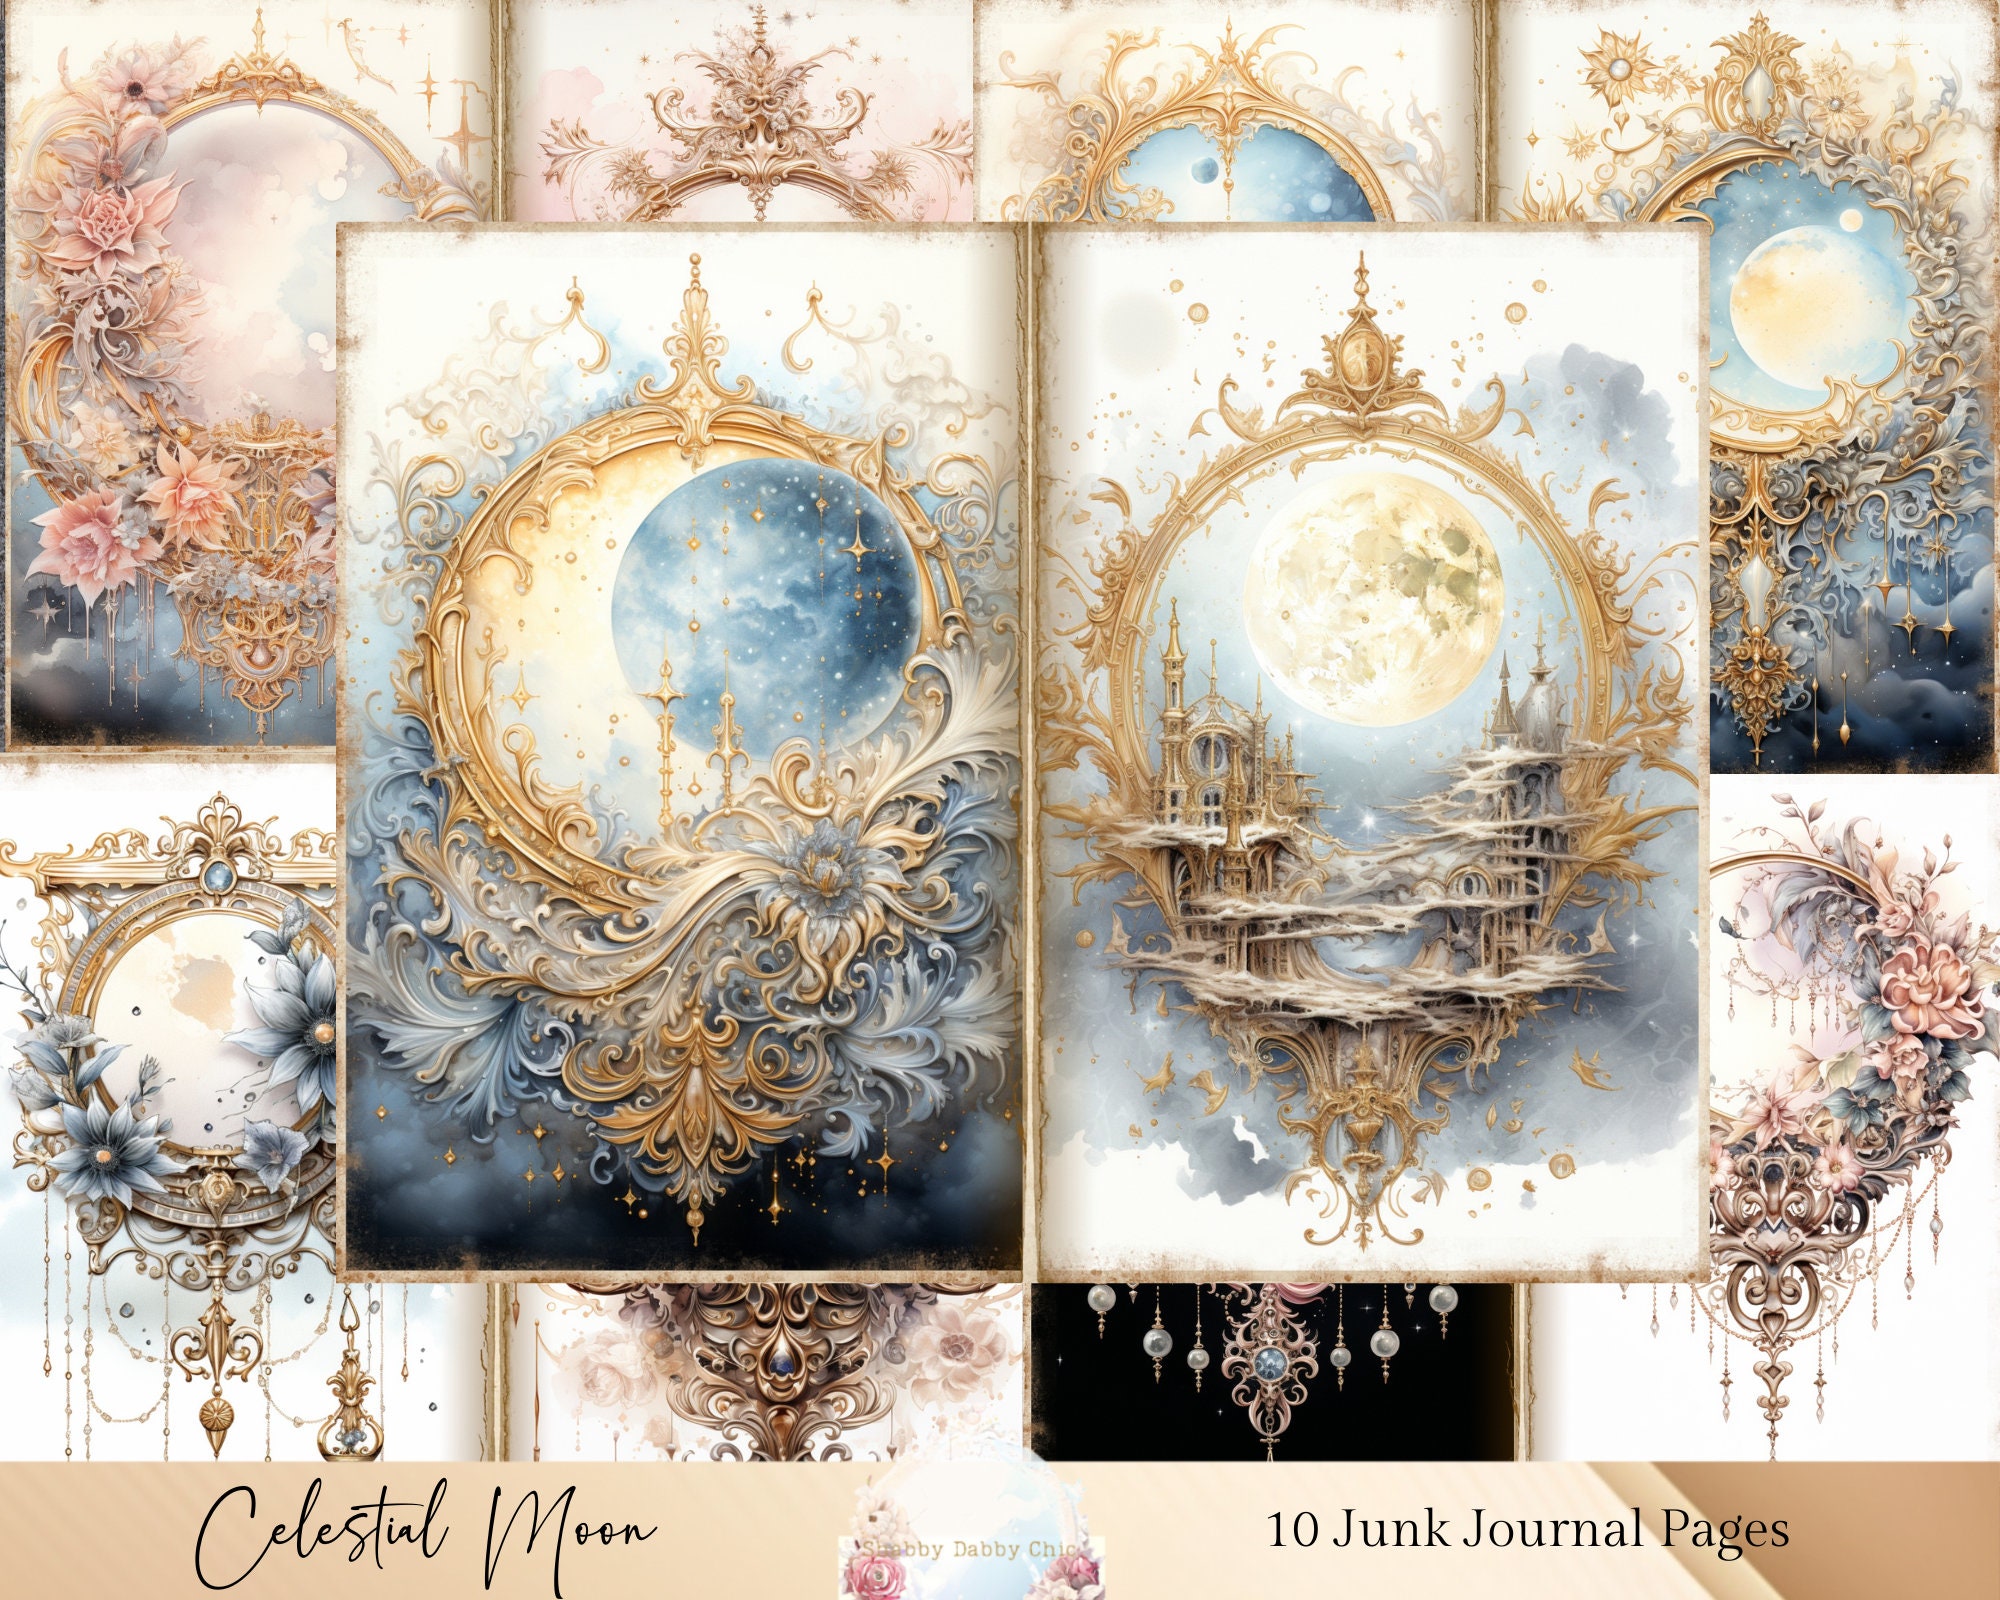 20 Piece Celestial Themed Journal Cards, Atc's, Art Cards, Celestial Journal,  Scrapbook Kit, Junk Journal, Vintage, Cardmaking, Collage 